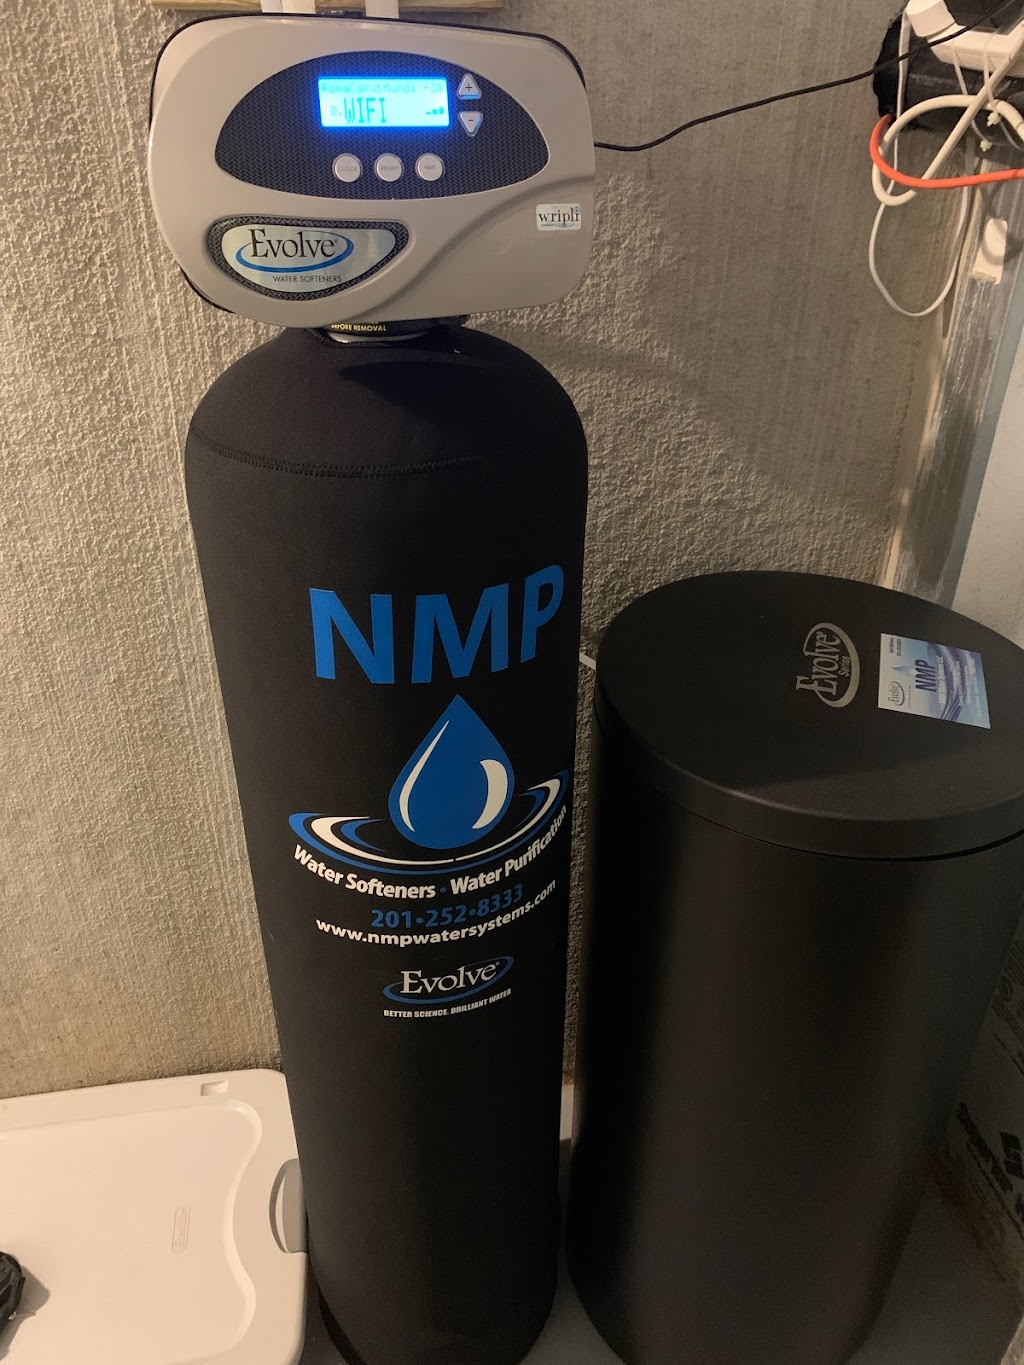 NMP Water Systems | 63 Ramapo Valley Rd, Mahwah, NJ 07430 | Phone: (201) 252-8333